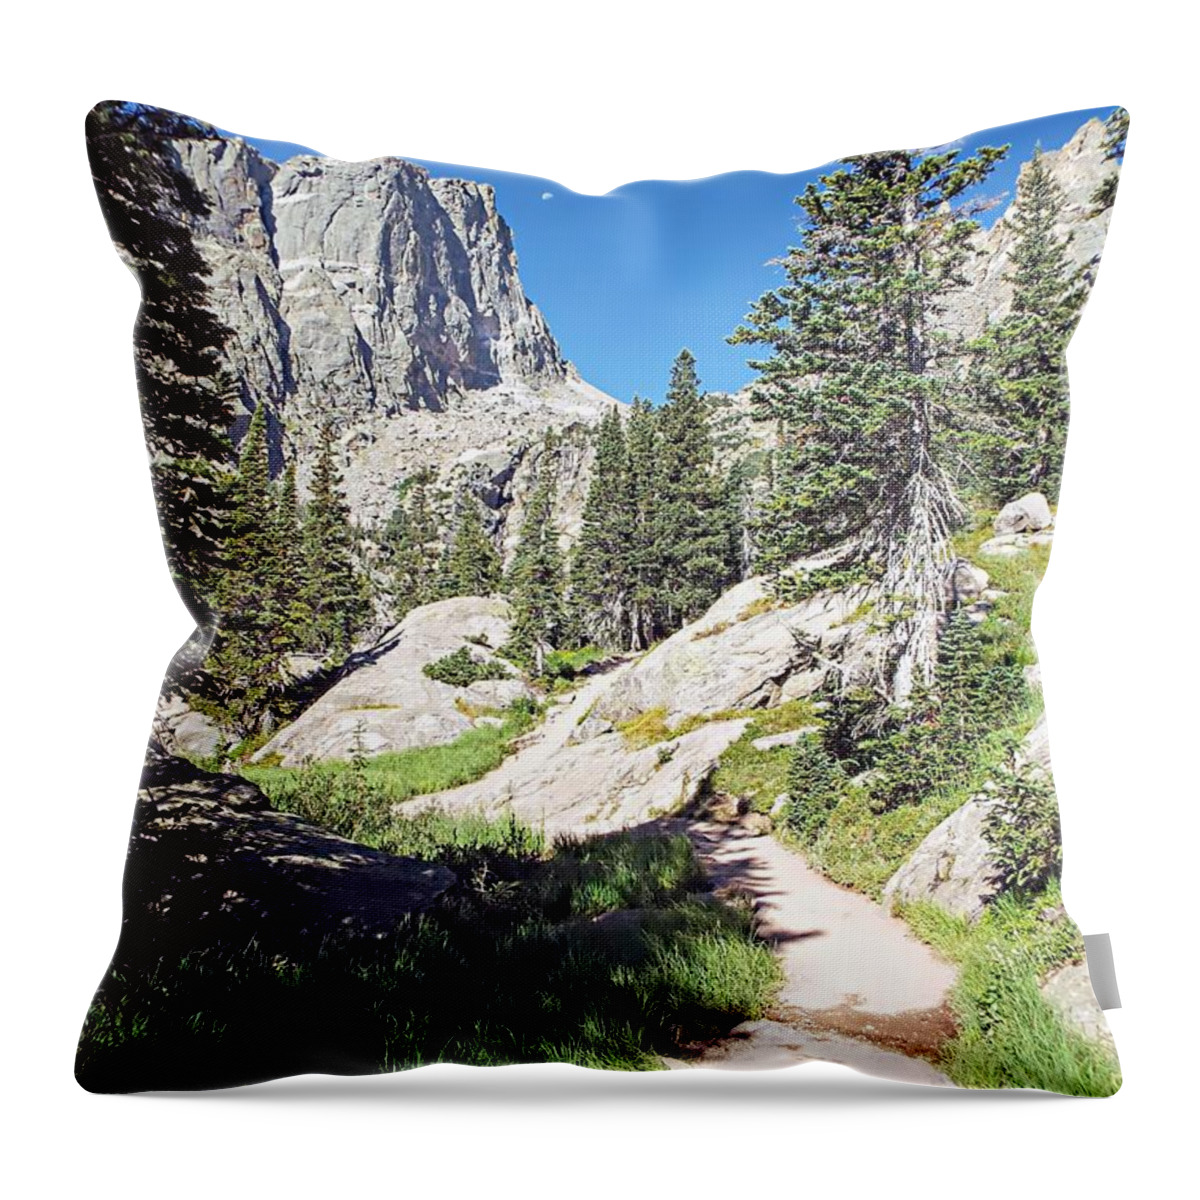 United States Throw Pillow featuring the photograph Emerald Lake Trail - Rocky Mountain National Park by Joseph Hendrix